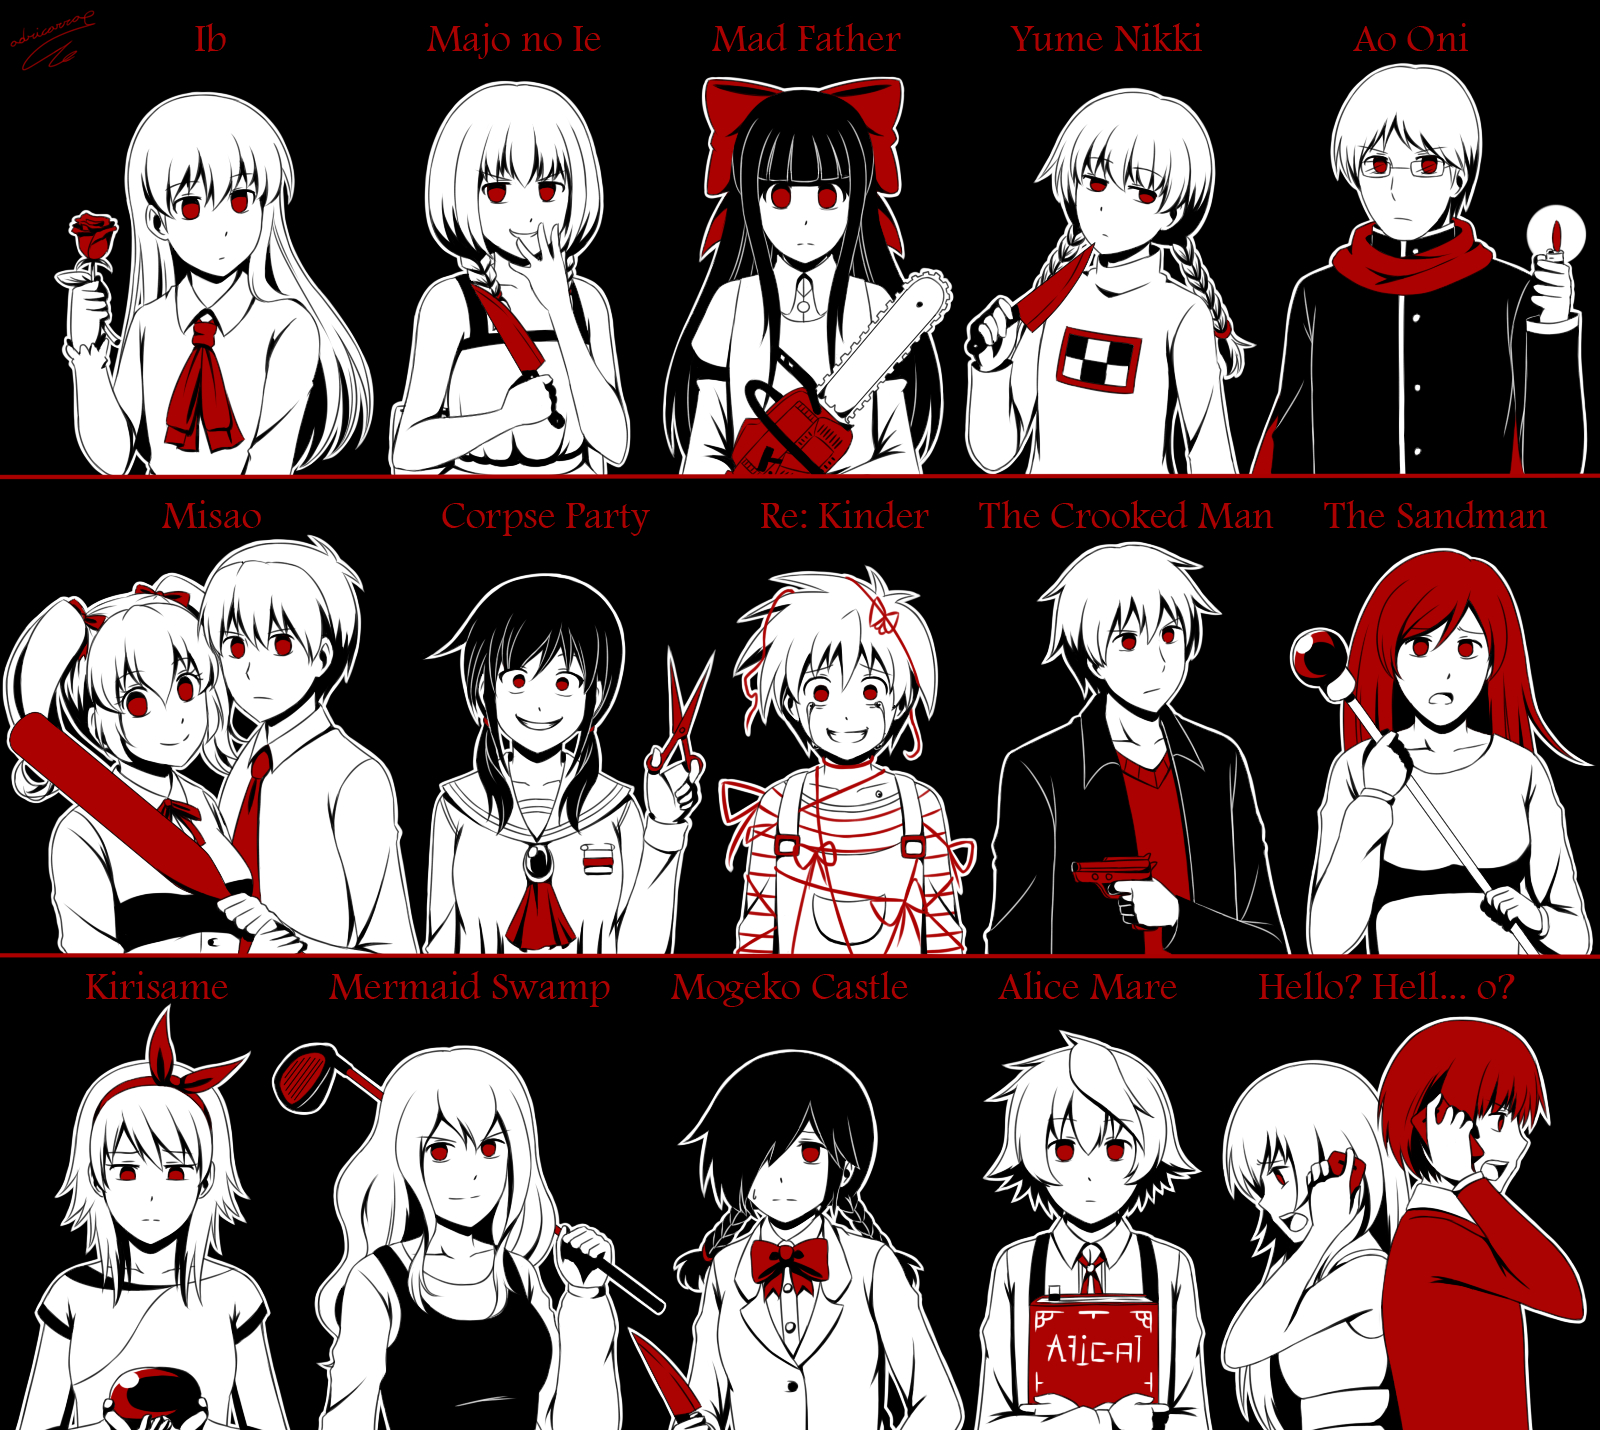 Alice, Mare, Ao, Oni, Corpse, Party, Blood, Covered, Hello, Hell, Ib, Kirisame, furu, Mori, Mad, Father, Mermaid, Swamp, Misao, Mogeko, Castle, Re, Kinder, The, Crooked, Man, Sandman, Witchs, House, Yume, Nikki, Akari, Aki, Akito, Allen, Aya, Drevis, David, Hoover, Hiroshi, black, hair, book, braids, crossover, crying, fire, flower, genderswap, group, band, happy, long, megane, overalls, eyes, ribbon, scarf, short, smile, sweatdrop, sweater, telephone, twin, tails, weapon, , , anime, picture, , |, , , pictures